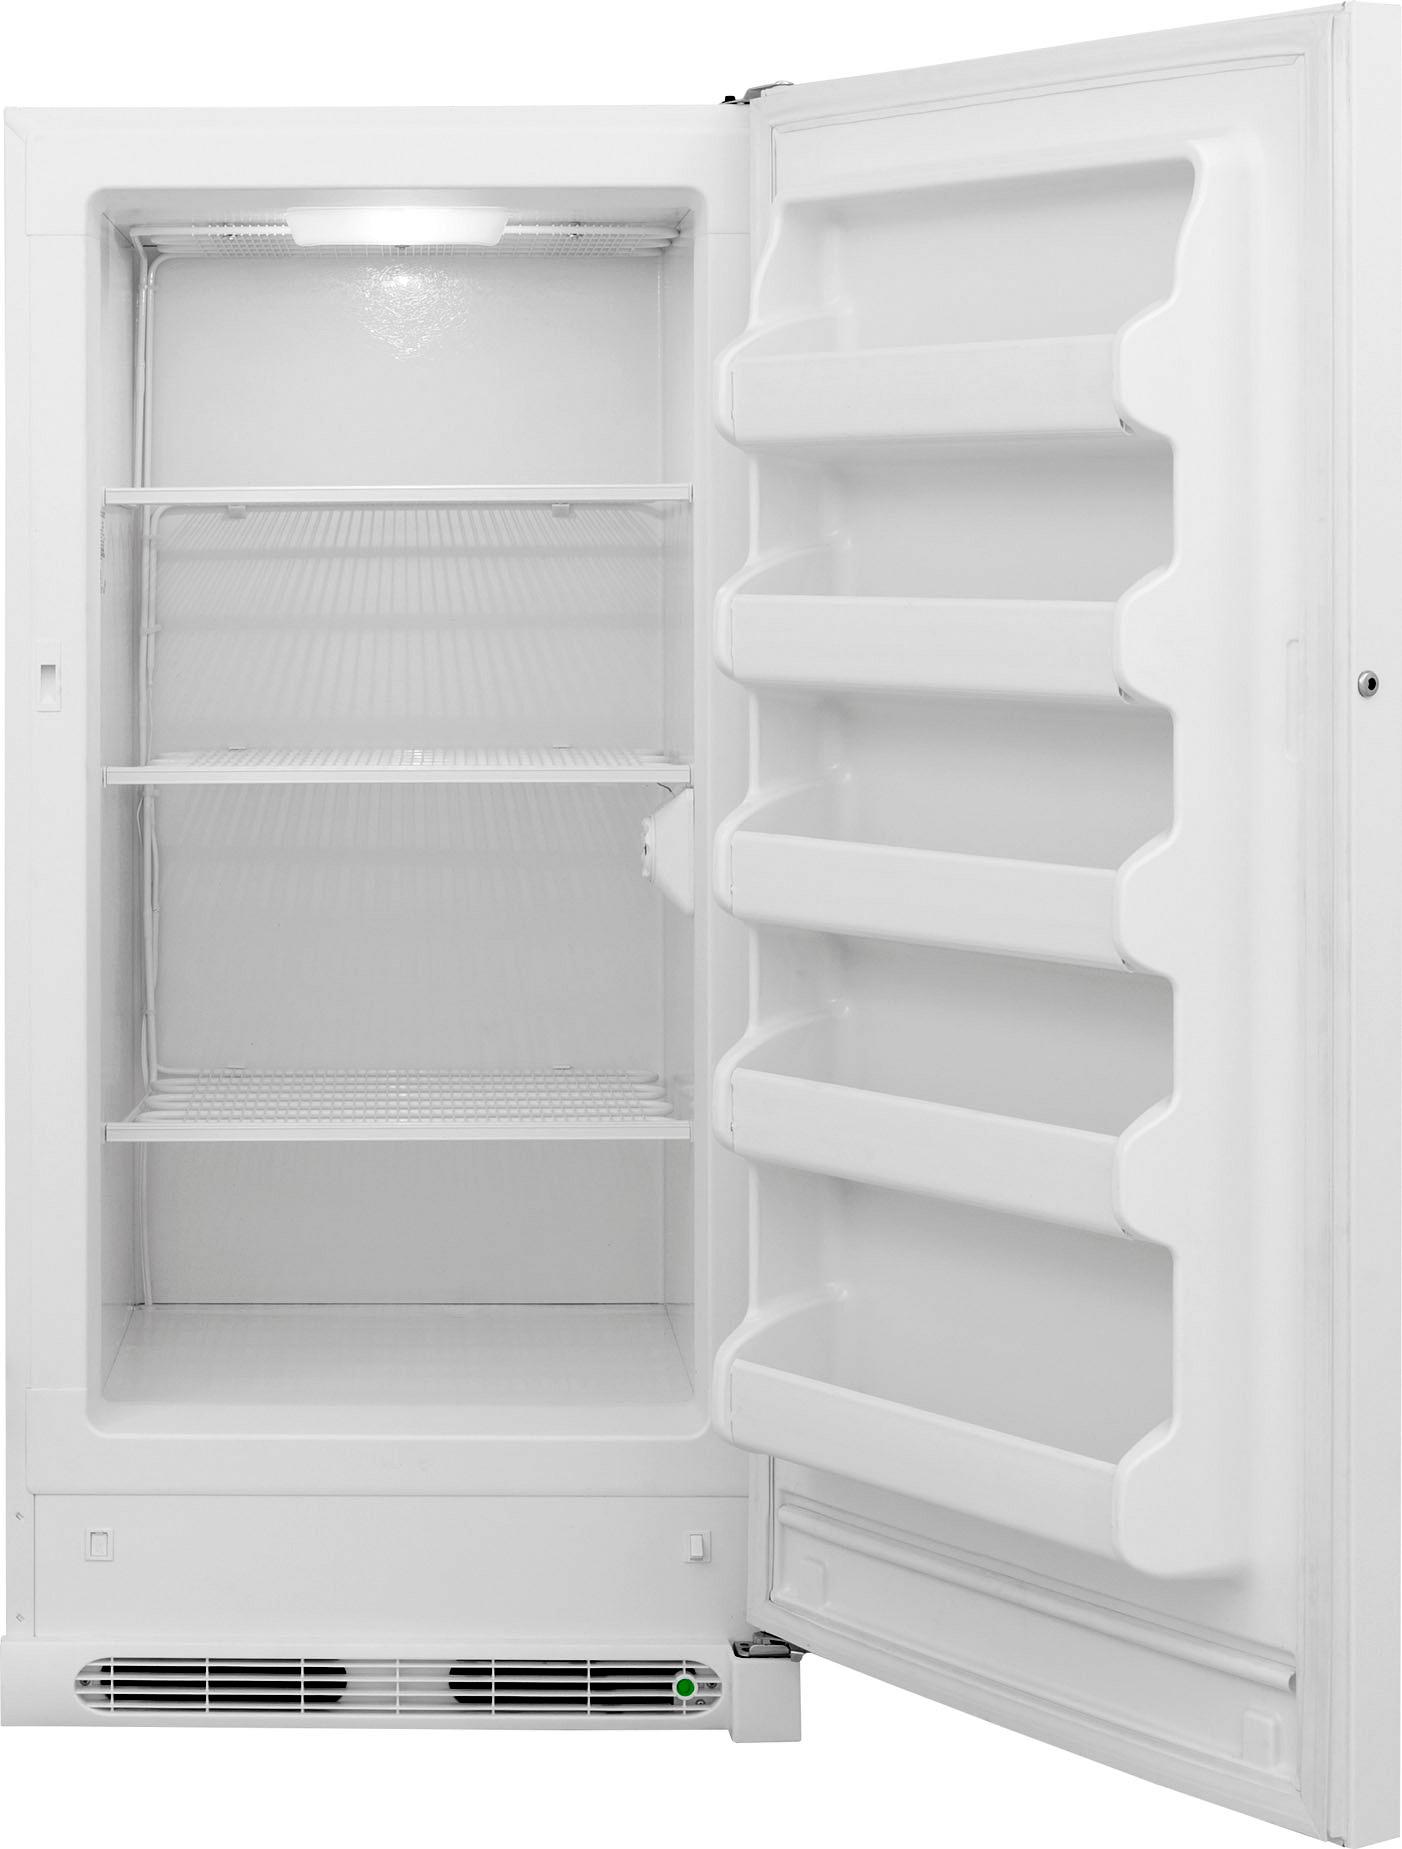 Questions and Answers: Frigidaire 14.0 Cu. Ft. Upright Freezer ...